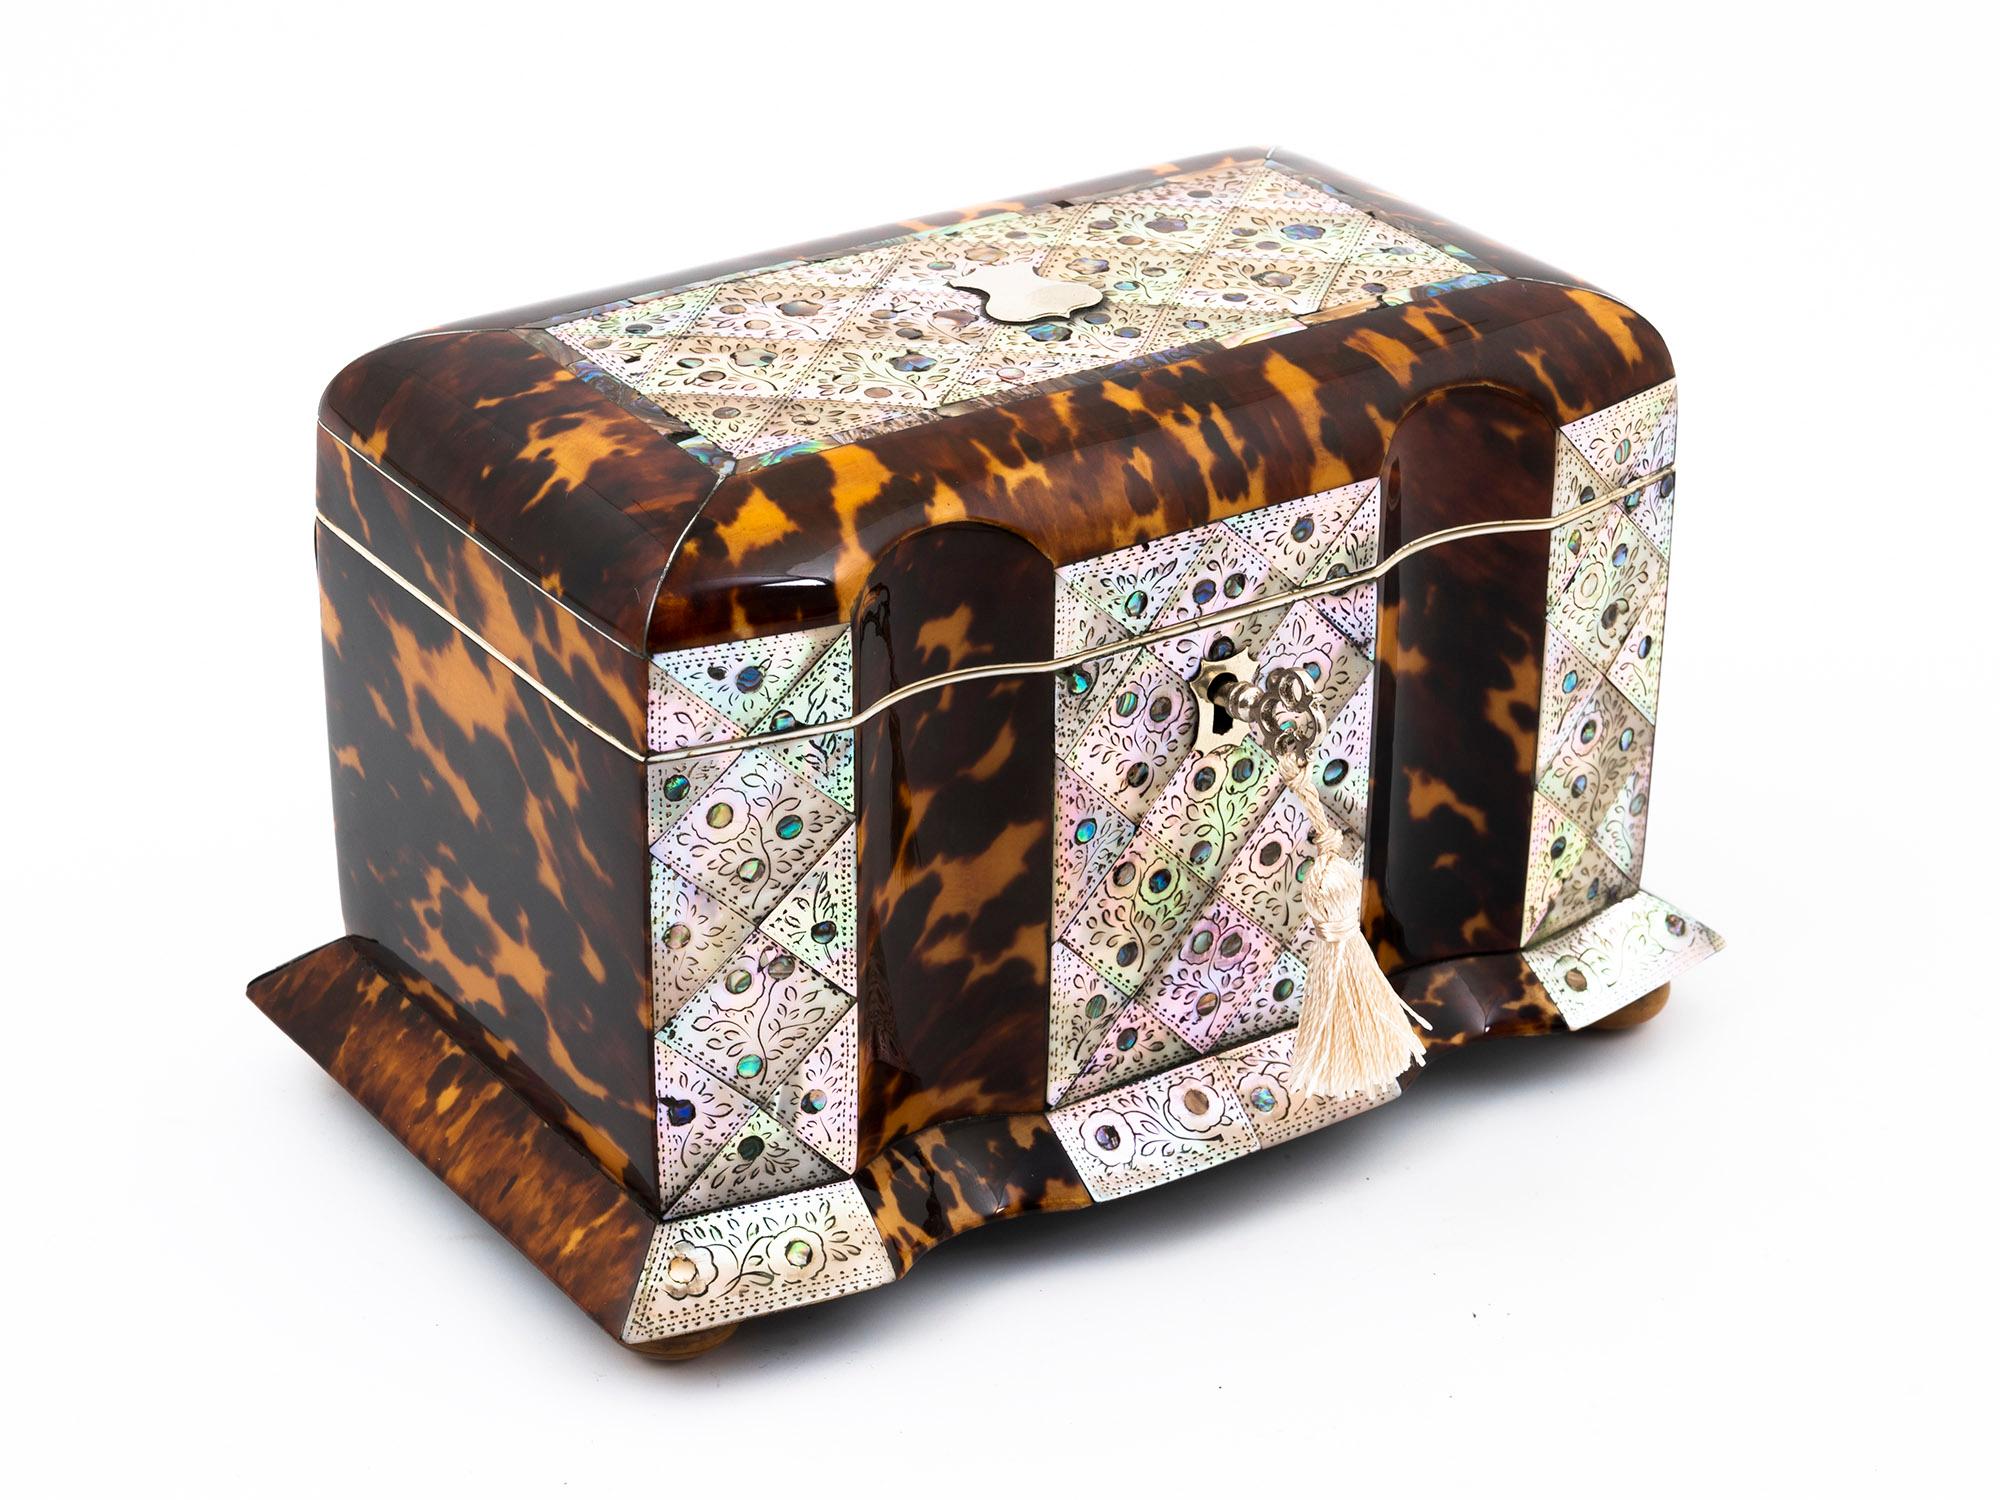 Regency Tortoiseshell and Mother of Pearl Serpentine Tea Caddy For Sale 2